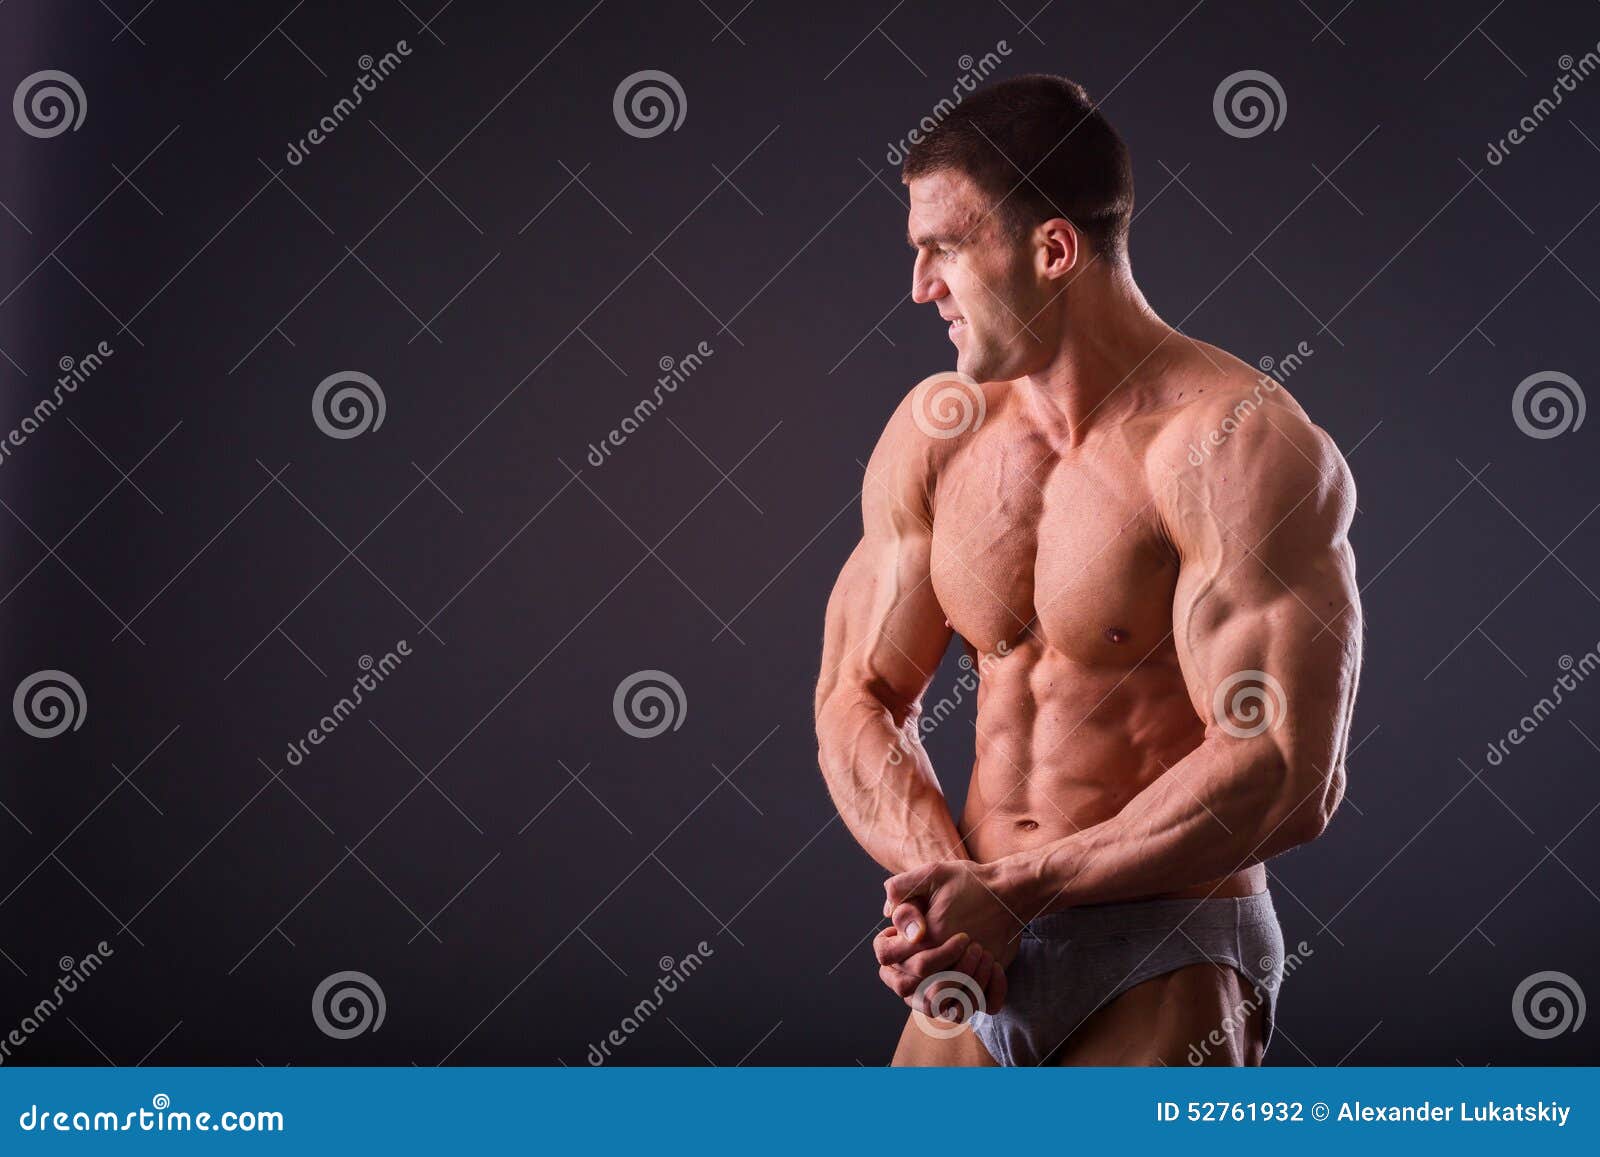 Bodybuilder stock photo. Image of building, back, article - 52761932